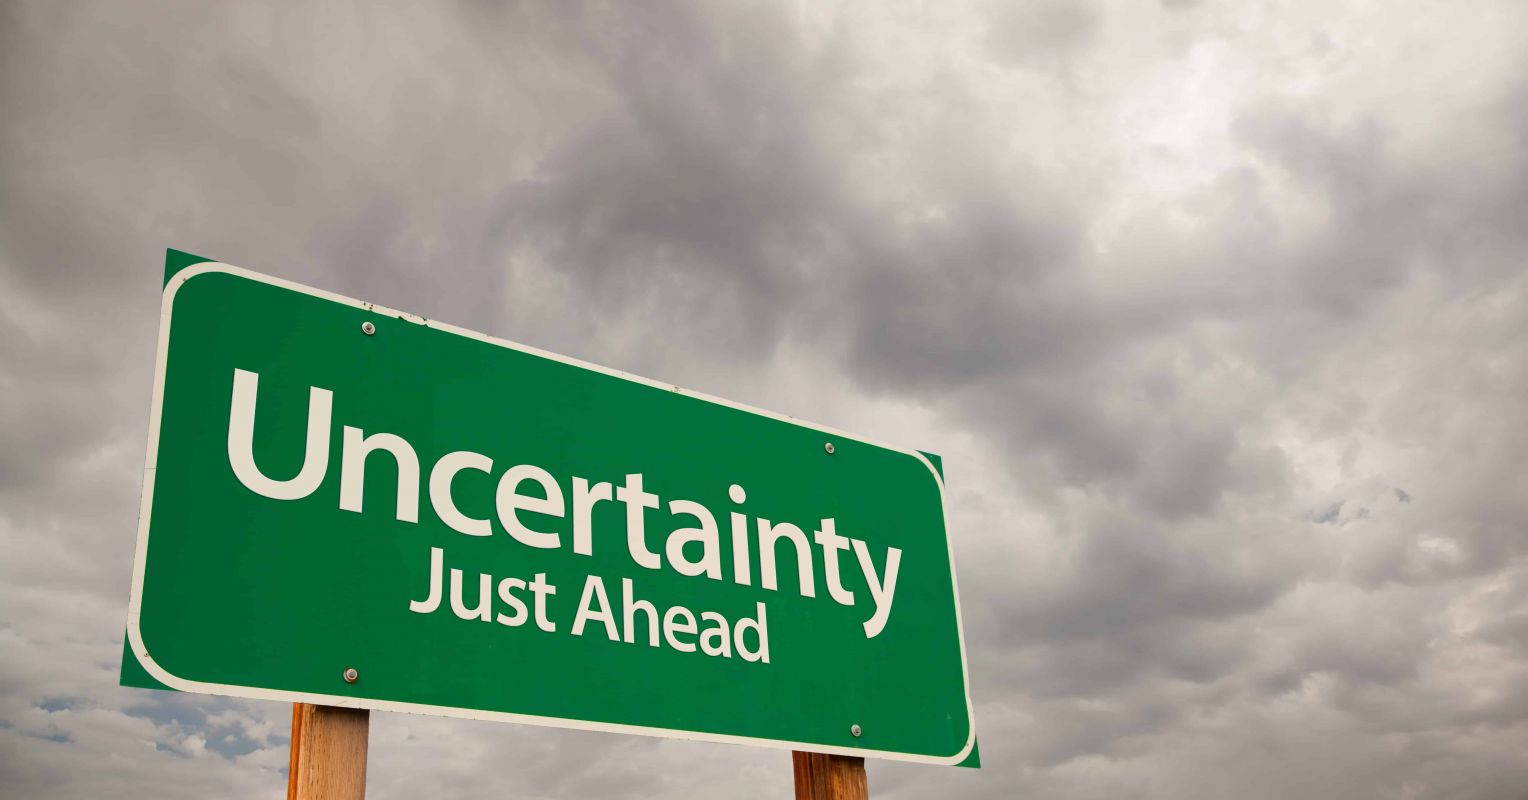 Are You Afraid of Uncertainty? | Psychology Today